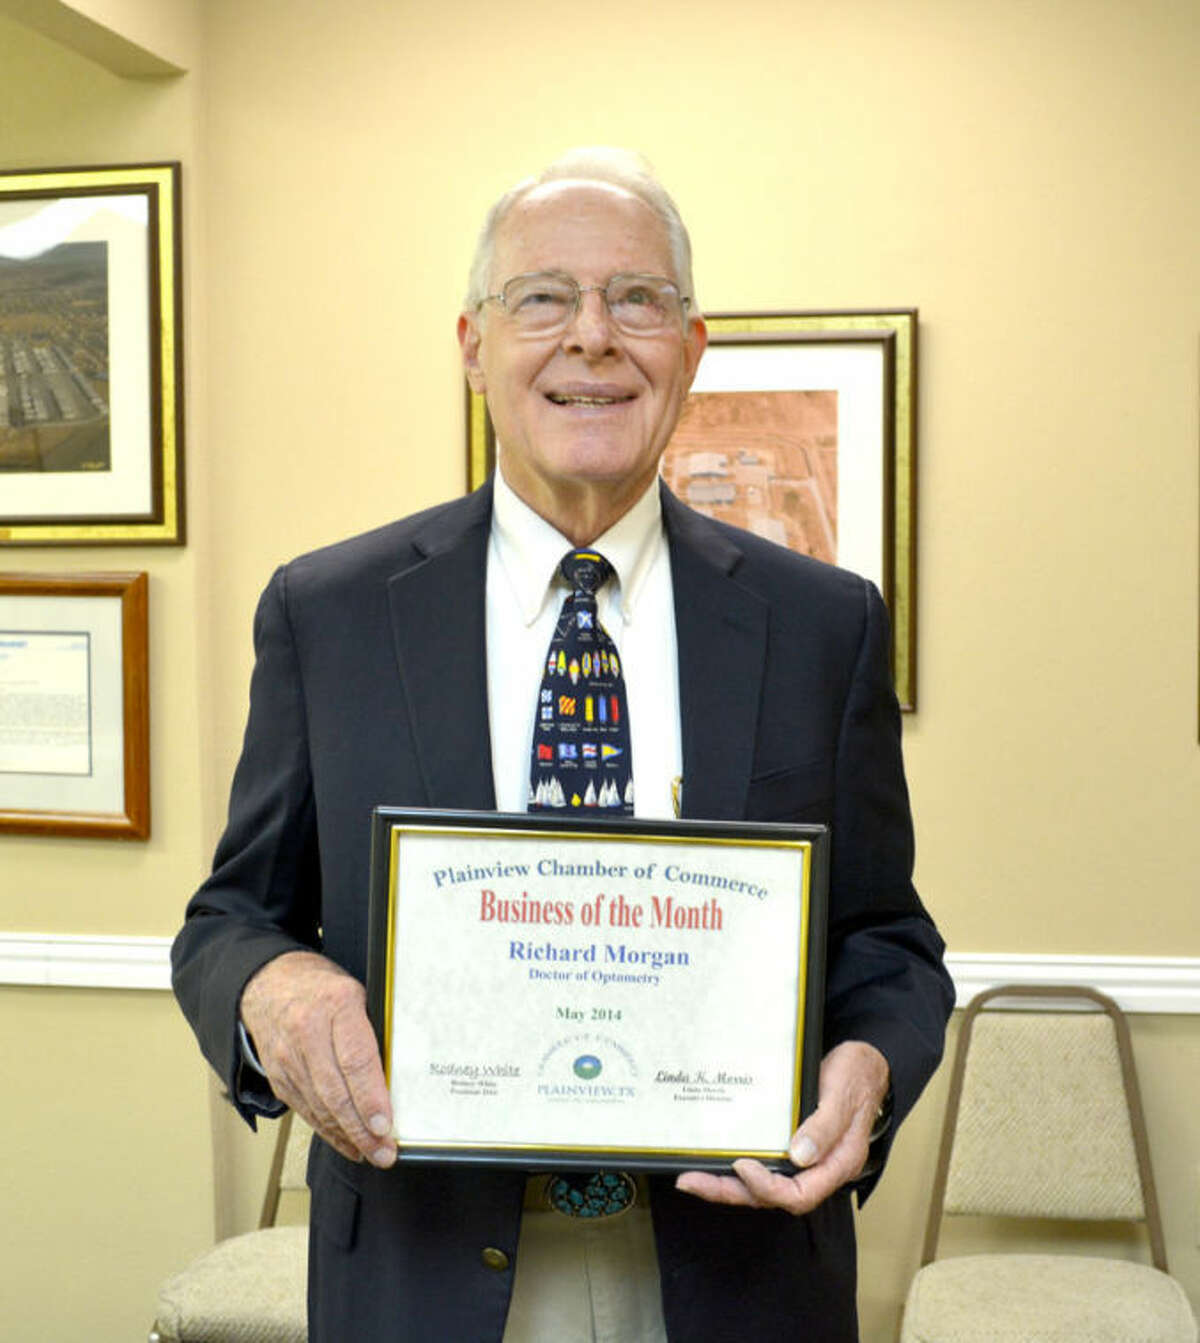 Doug McDonough/Plainview HeraldLocal optometrist Dr. Richard Morgan was recognized Tuesday as the Chamber of Commerce Business of the Month. His office is located at 2201 Edgemere Dr., and Morgan has been in practice here for 53 years. A 1953 graduate of Plainview High School, he finds Plainview to be a great place to live and practice. “We have wonderful patients here in Plainview,” he told Chamber directors. He and his wife, Sharon, have been married since 1960. Morgan has been active in the community over the years, including serving as a member of the Plainview school board.